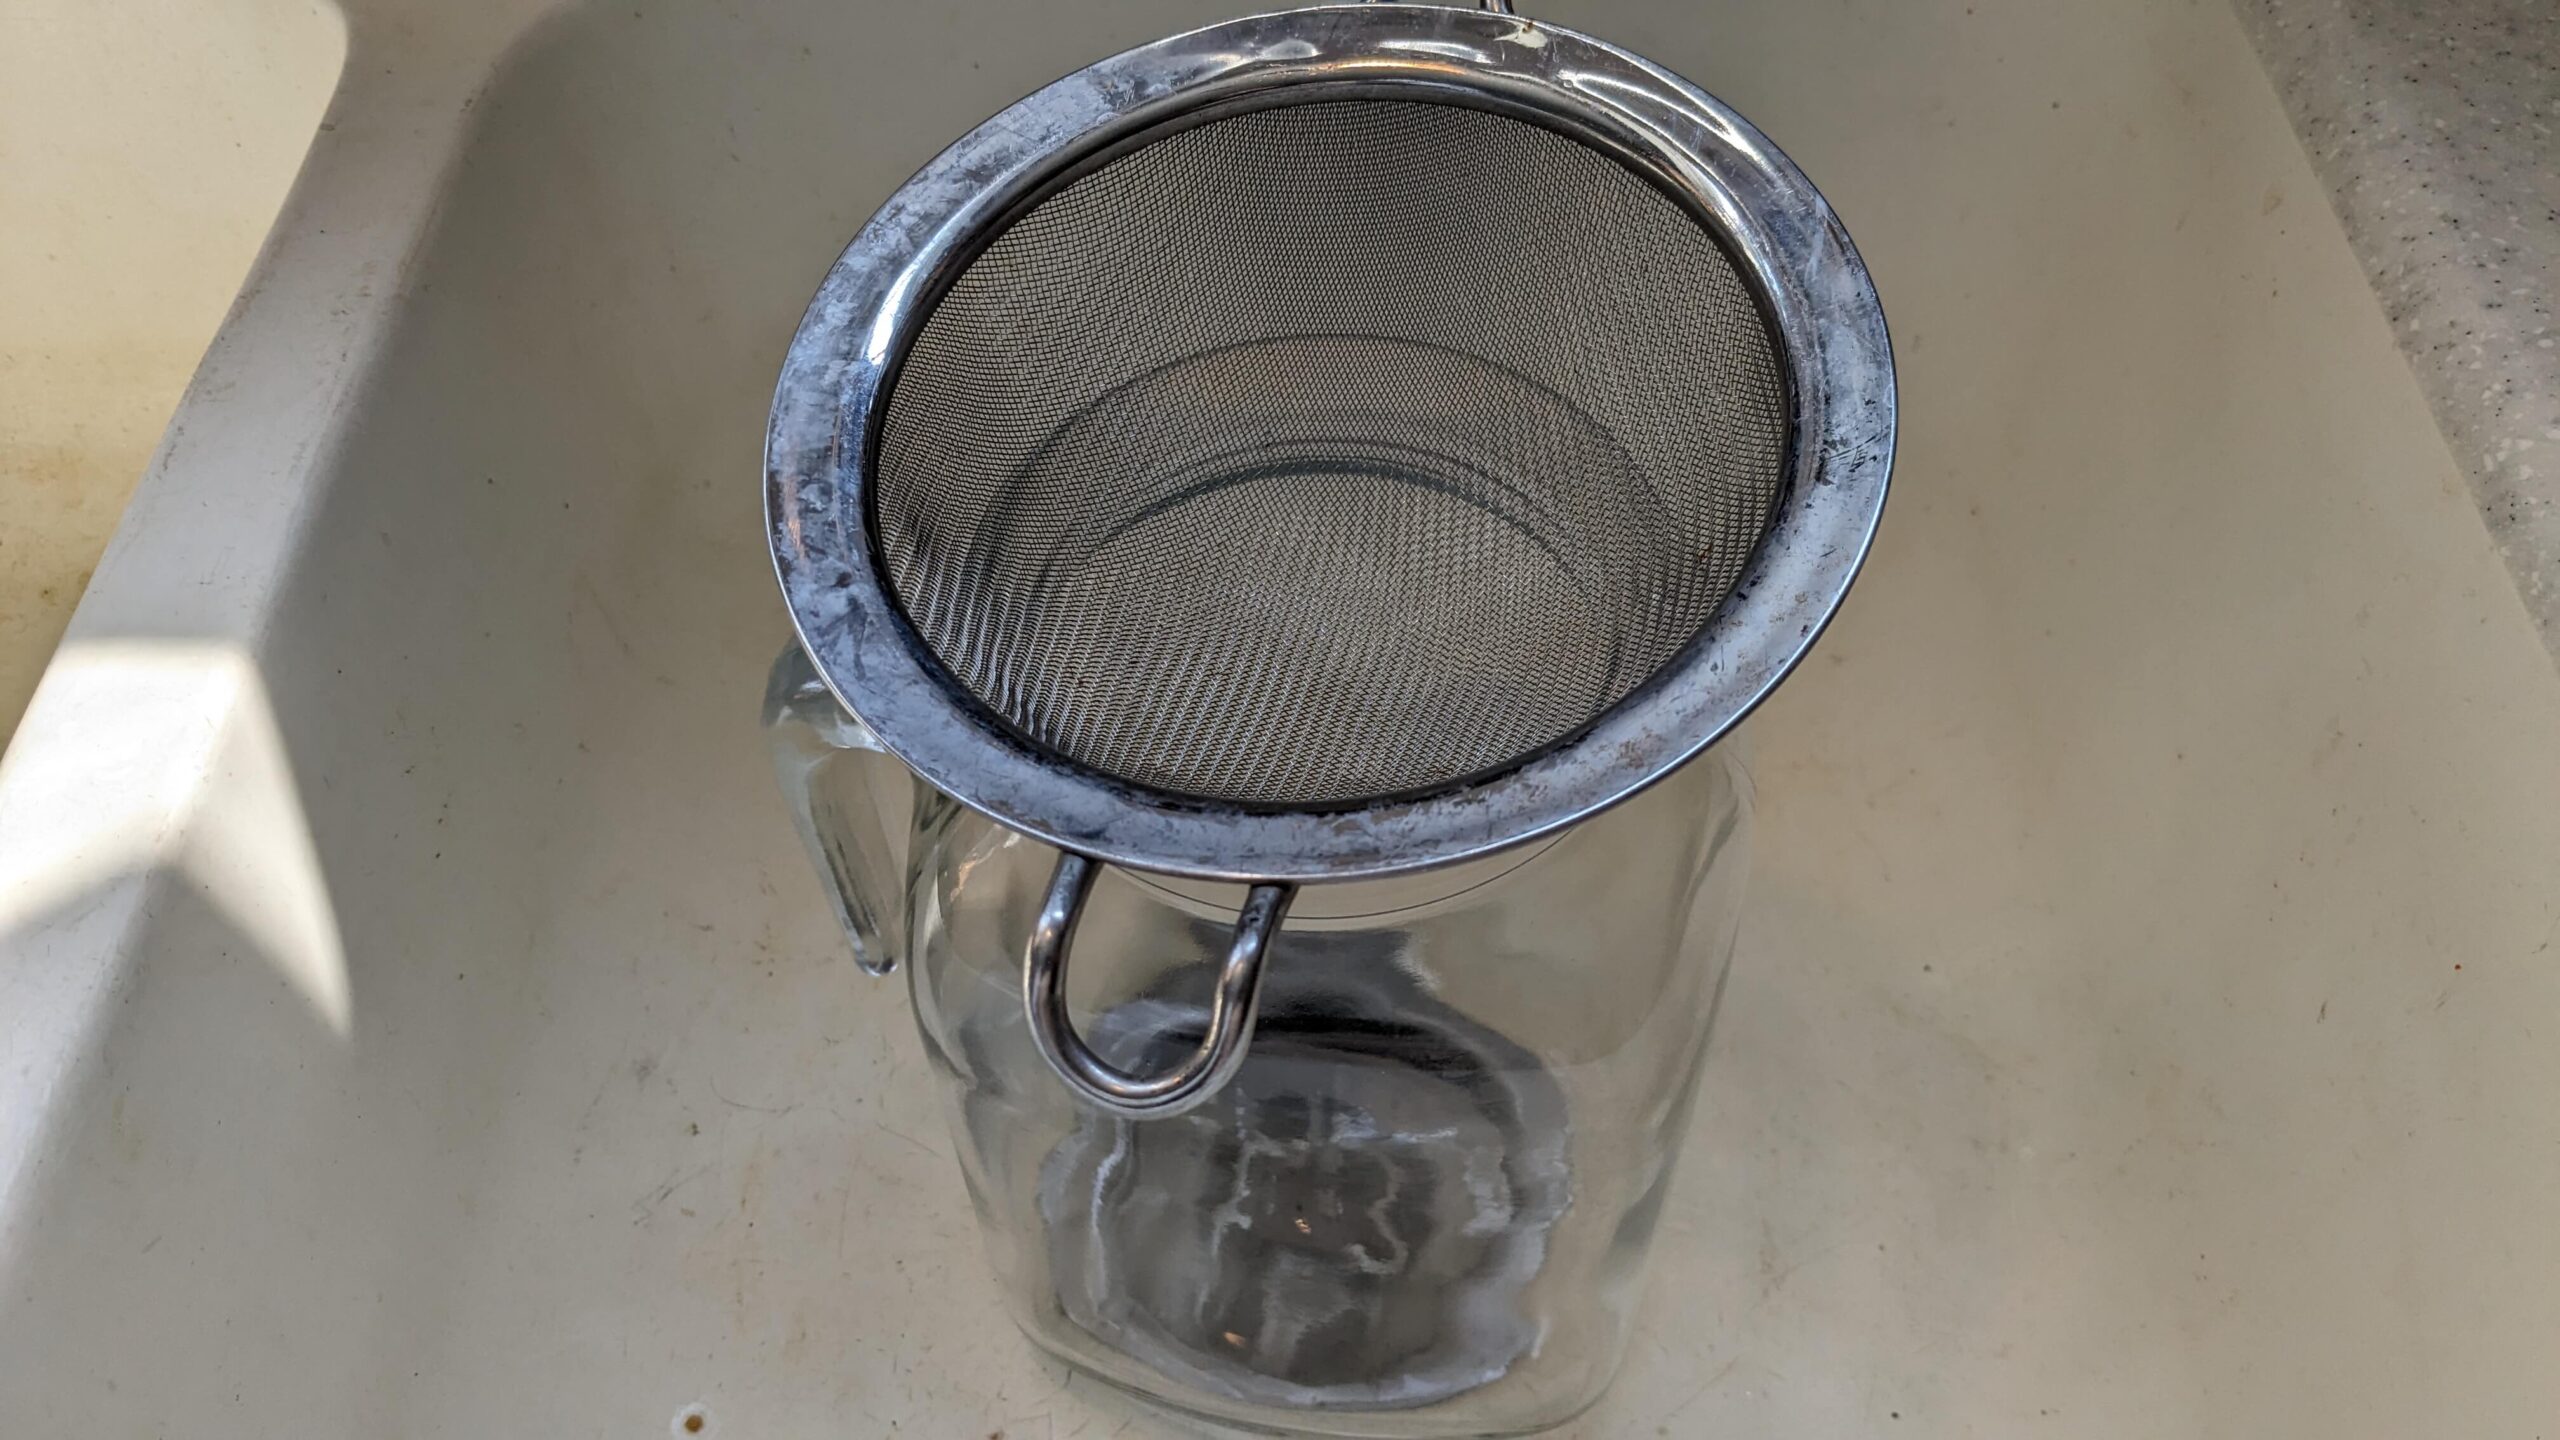 mesh strainer over a glass pitcher